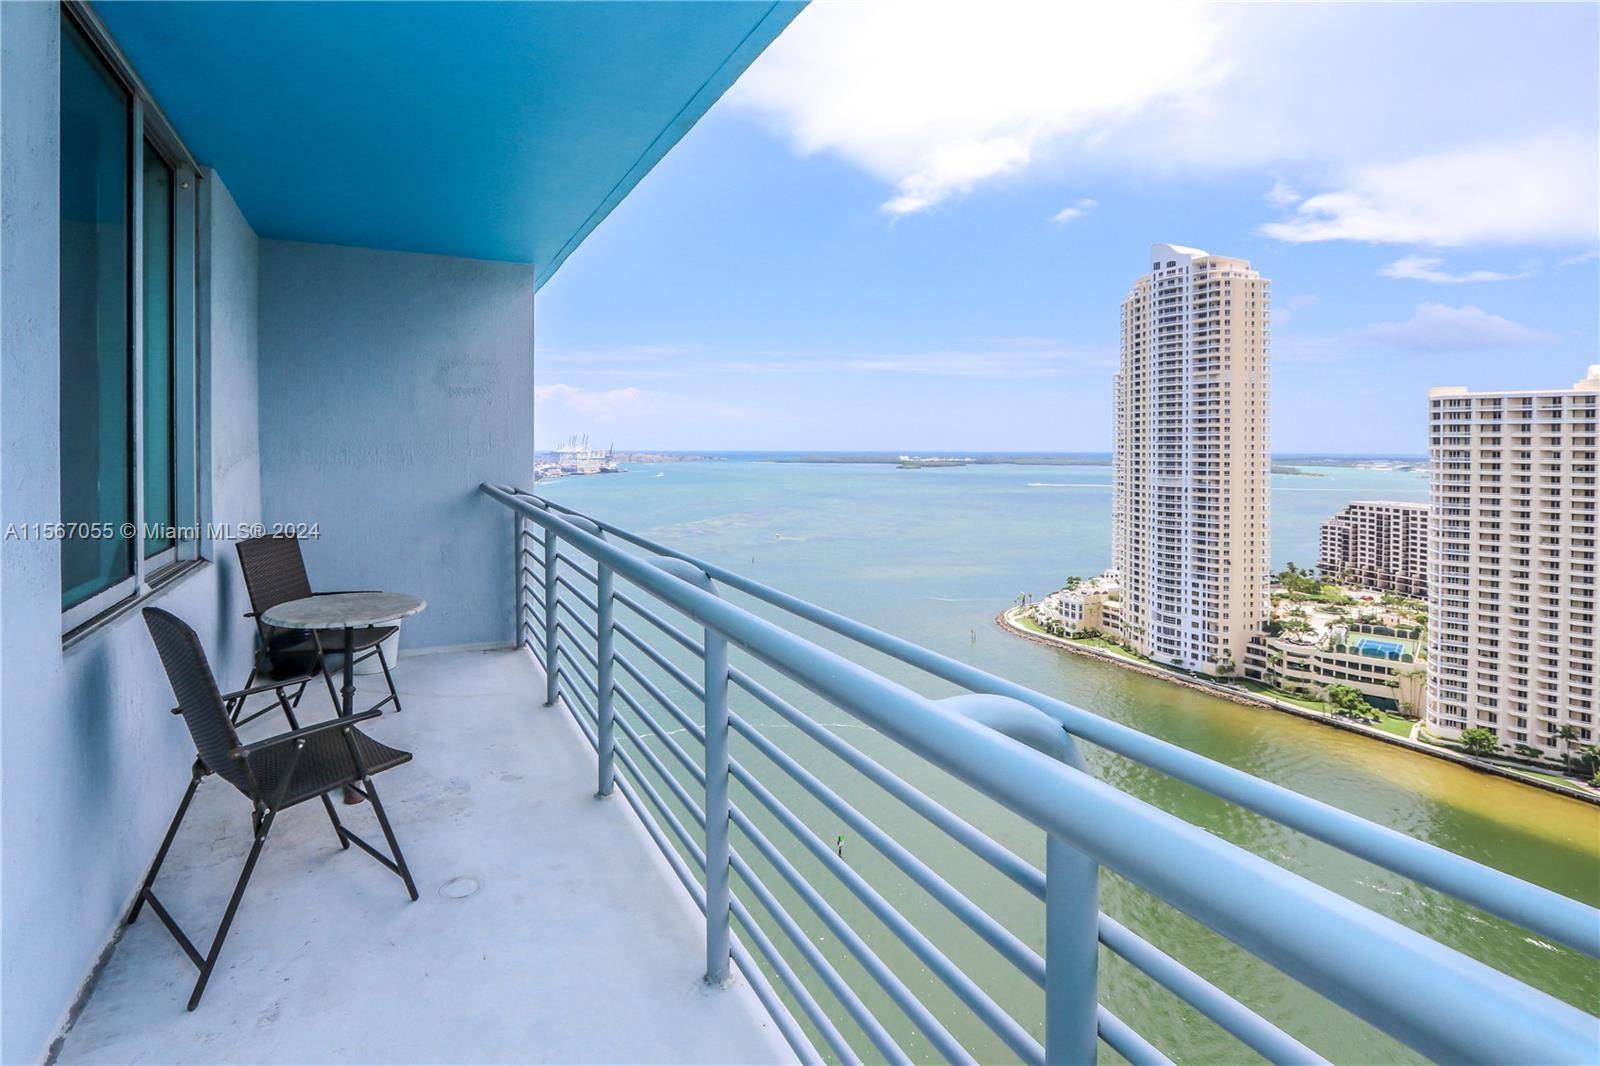 Beautiful 1 bedroom 1 bath condo nicely furnished overlooking Biscayne Bay, Miami River, and Brickell Skyline.